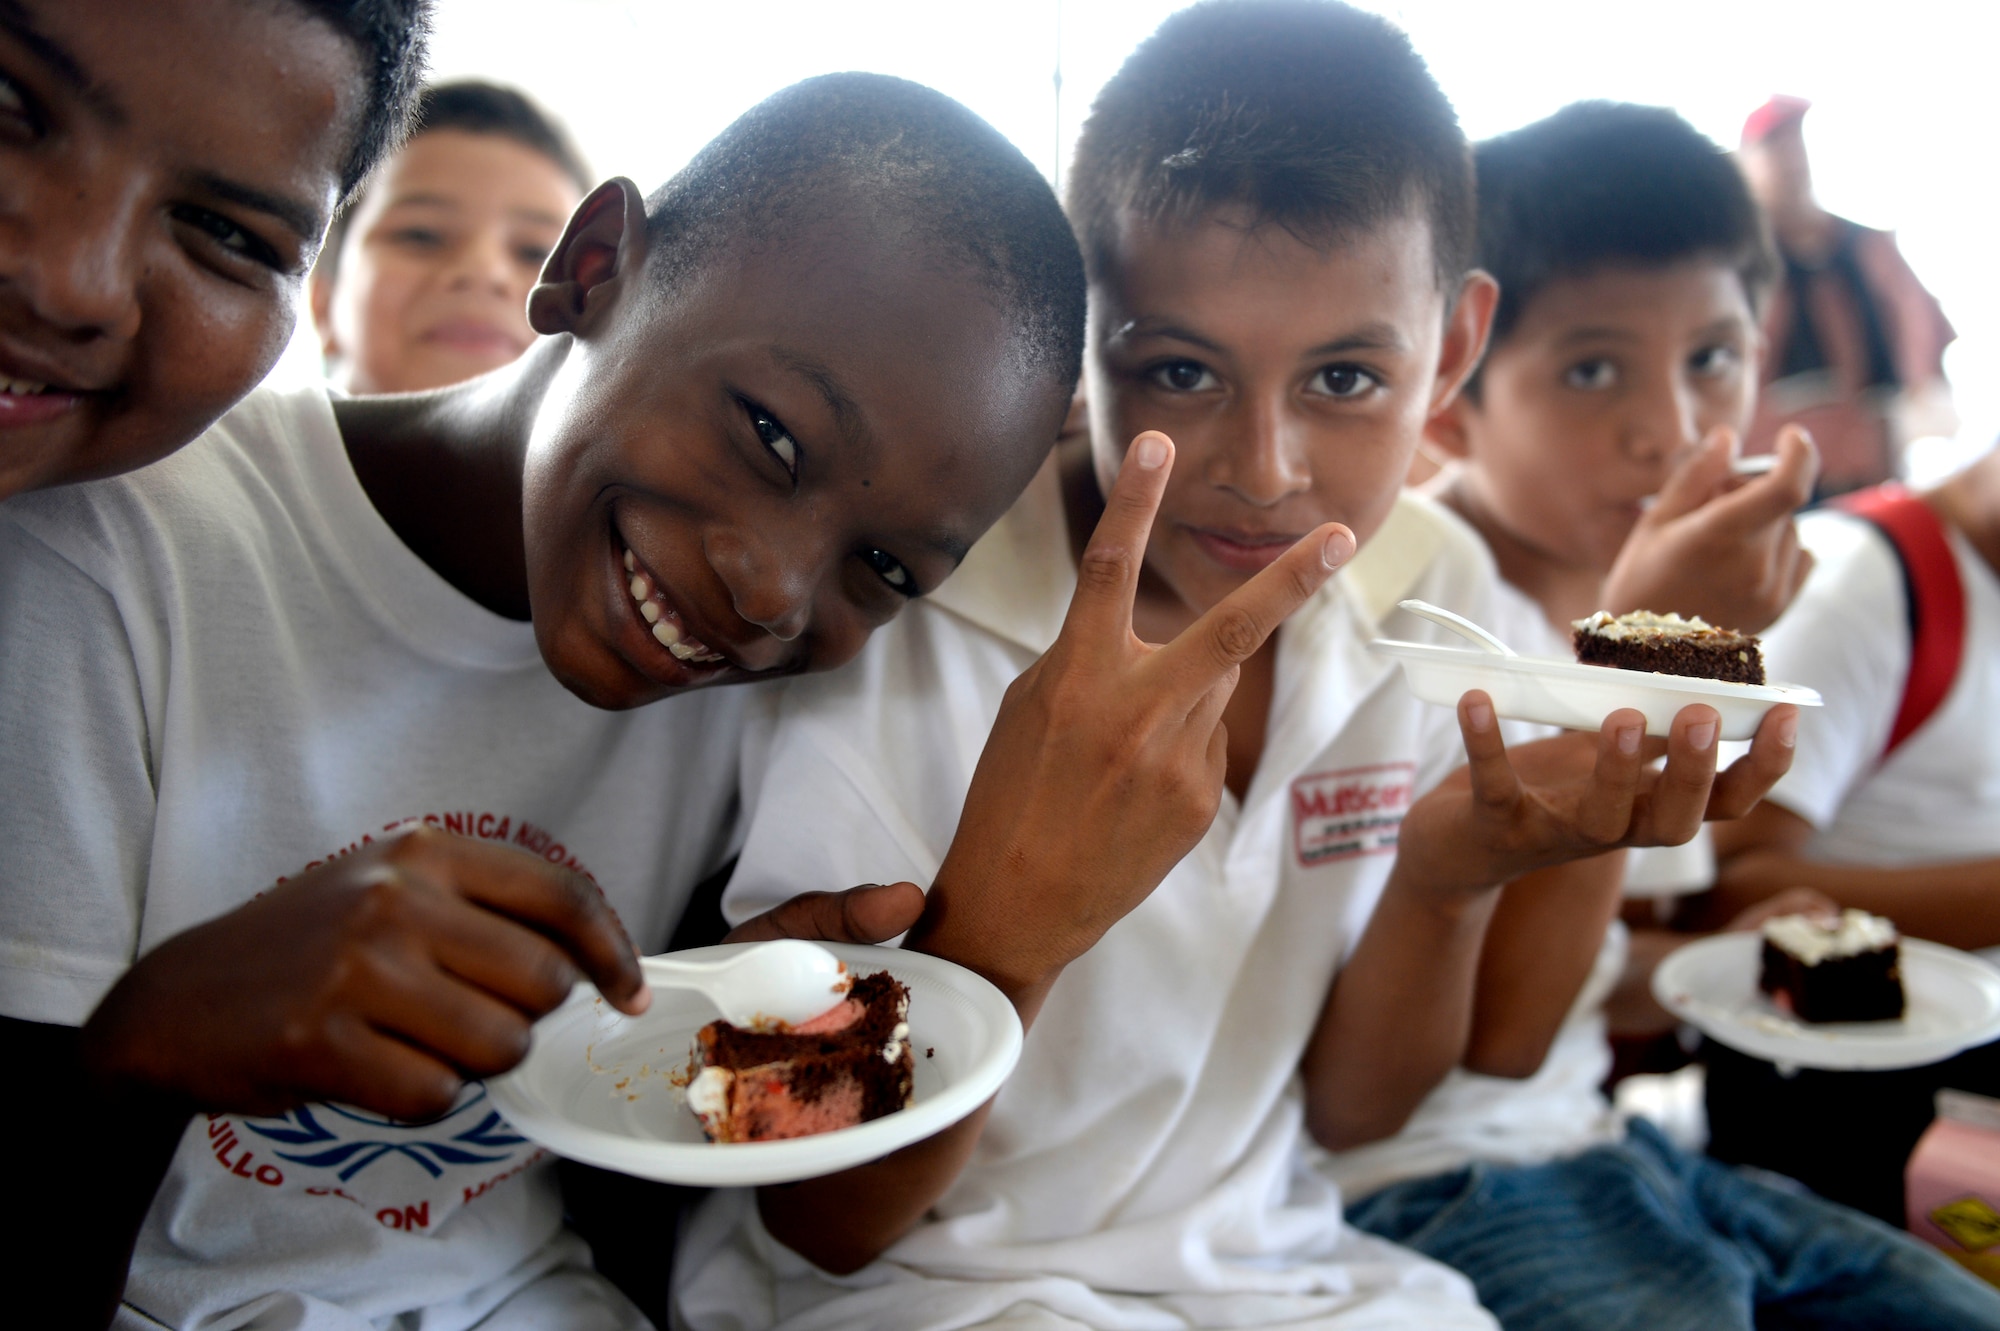 Children attending the Guardian of the Fatherland event at Puerto Castillo Naval Base in Trujillo, Honduras, June 6, 2015, eat dessert. The Guardians event is a twice annual event held at the base to reach at risk youth and provide them with instruction and training on human rights, military and spiritual training and English. NEW HORIZONS was launched in the 1980s and is an annual joint humanitarian assistance exercise that U.S. Southern Command conducts with a partner nation in Central America, South America or the Caribbean. The exercise improves joint training readiness of U.S. and partner nation civil engineers, medical professionals and support personnel through humanitarian assistance activities. (U.S. Air Force photo by Capt. David J. Murphy/Released)